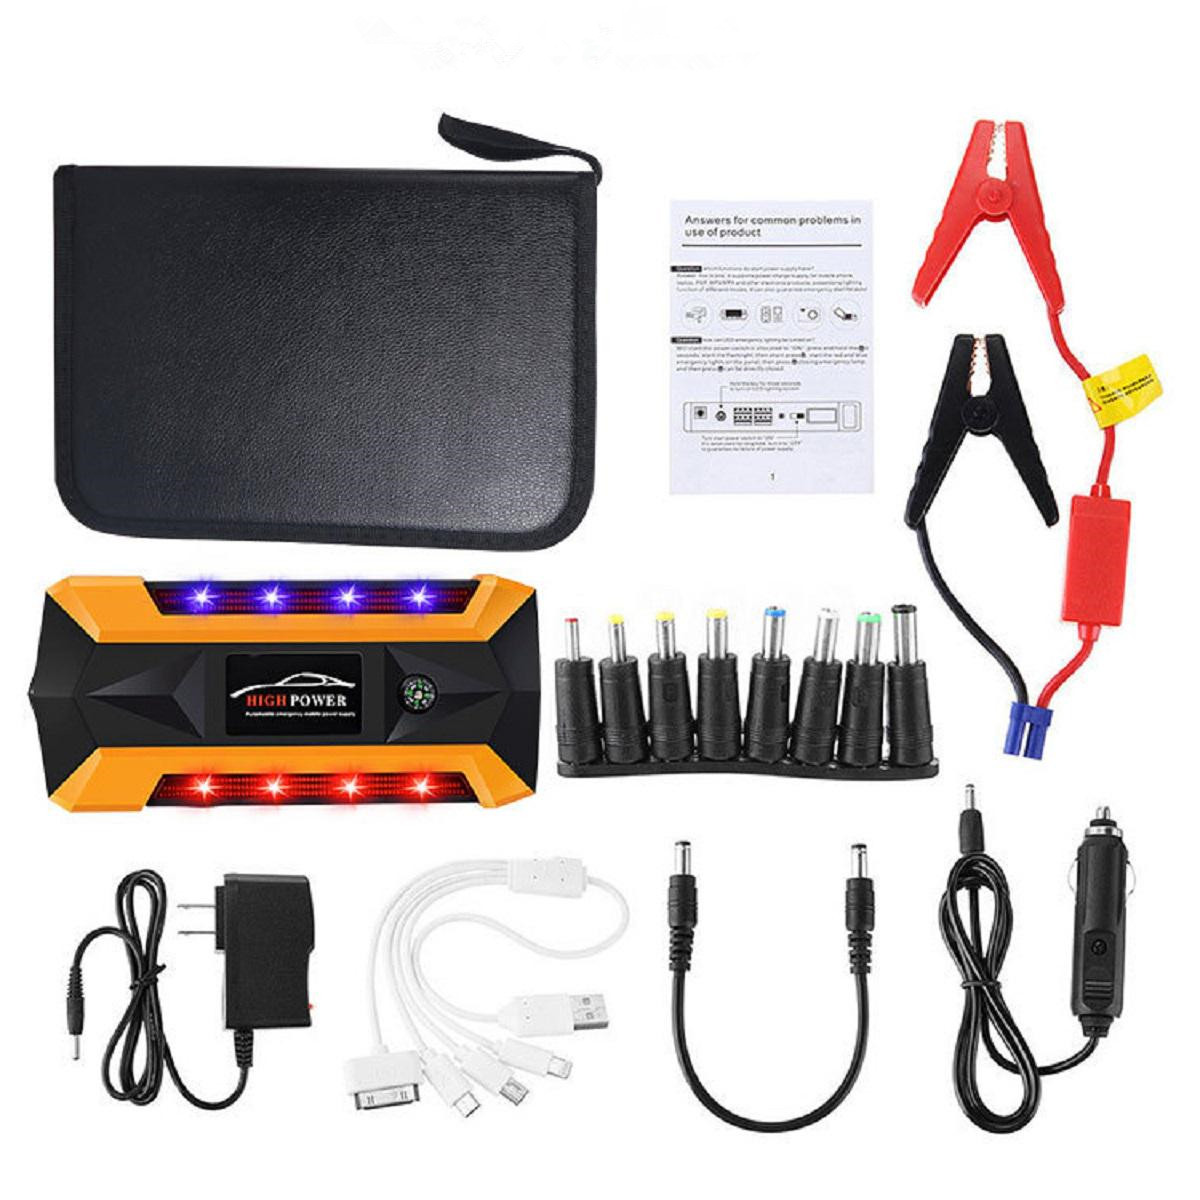 

Portable LED 89800mAh Car Jump Starter Pack Booster Charger Battery Power Bank Emergency Start Power With Safety Hammer